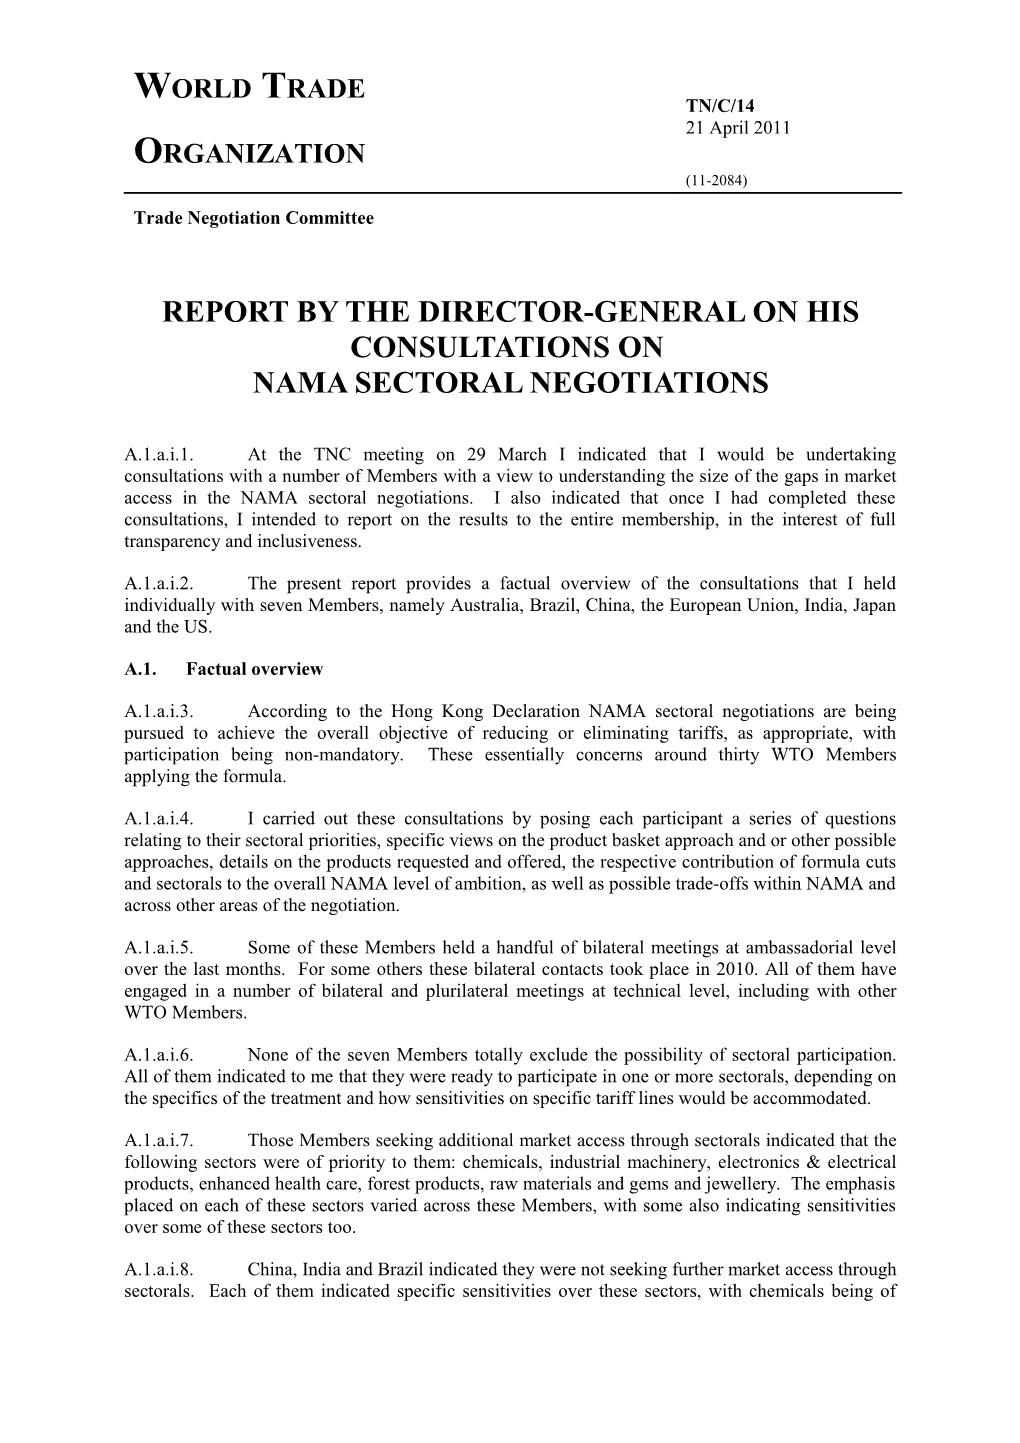 Report by the Director-General on His Consultations on NAMA Sectoral Negotiations